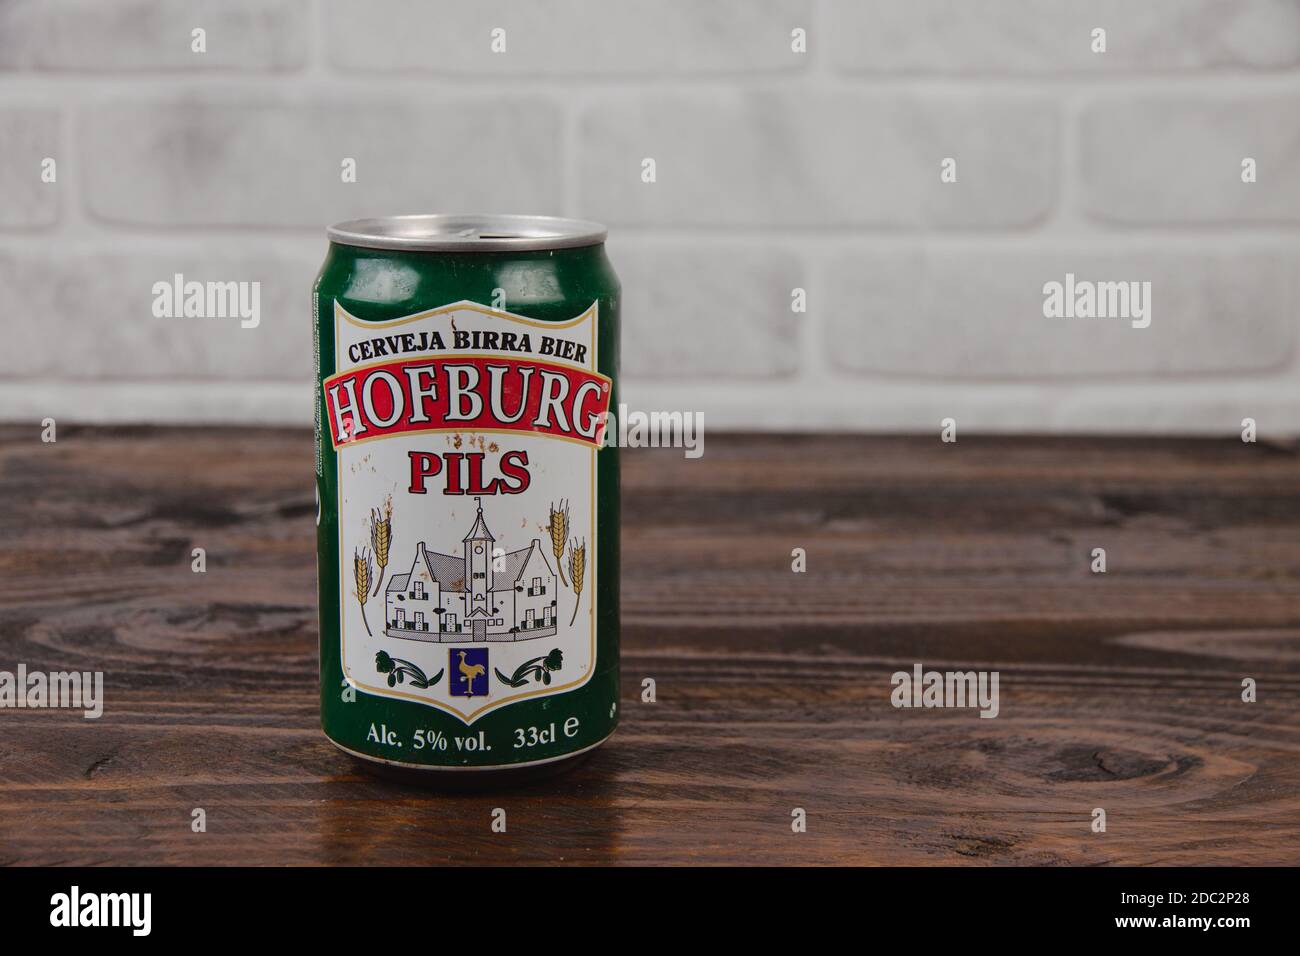 An old aluminium can of Hofburg Netherlands beer against the brick wall Stock Photo